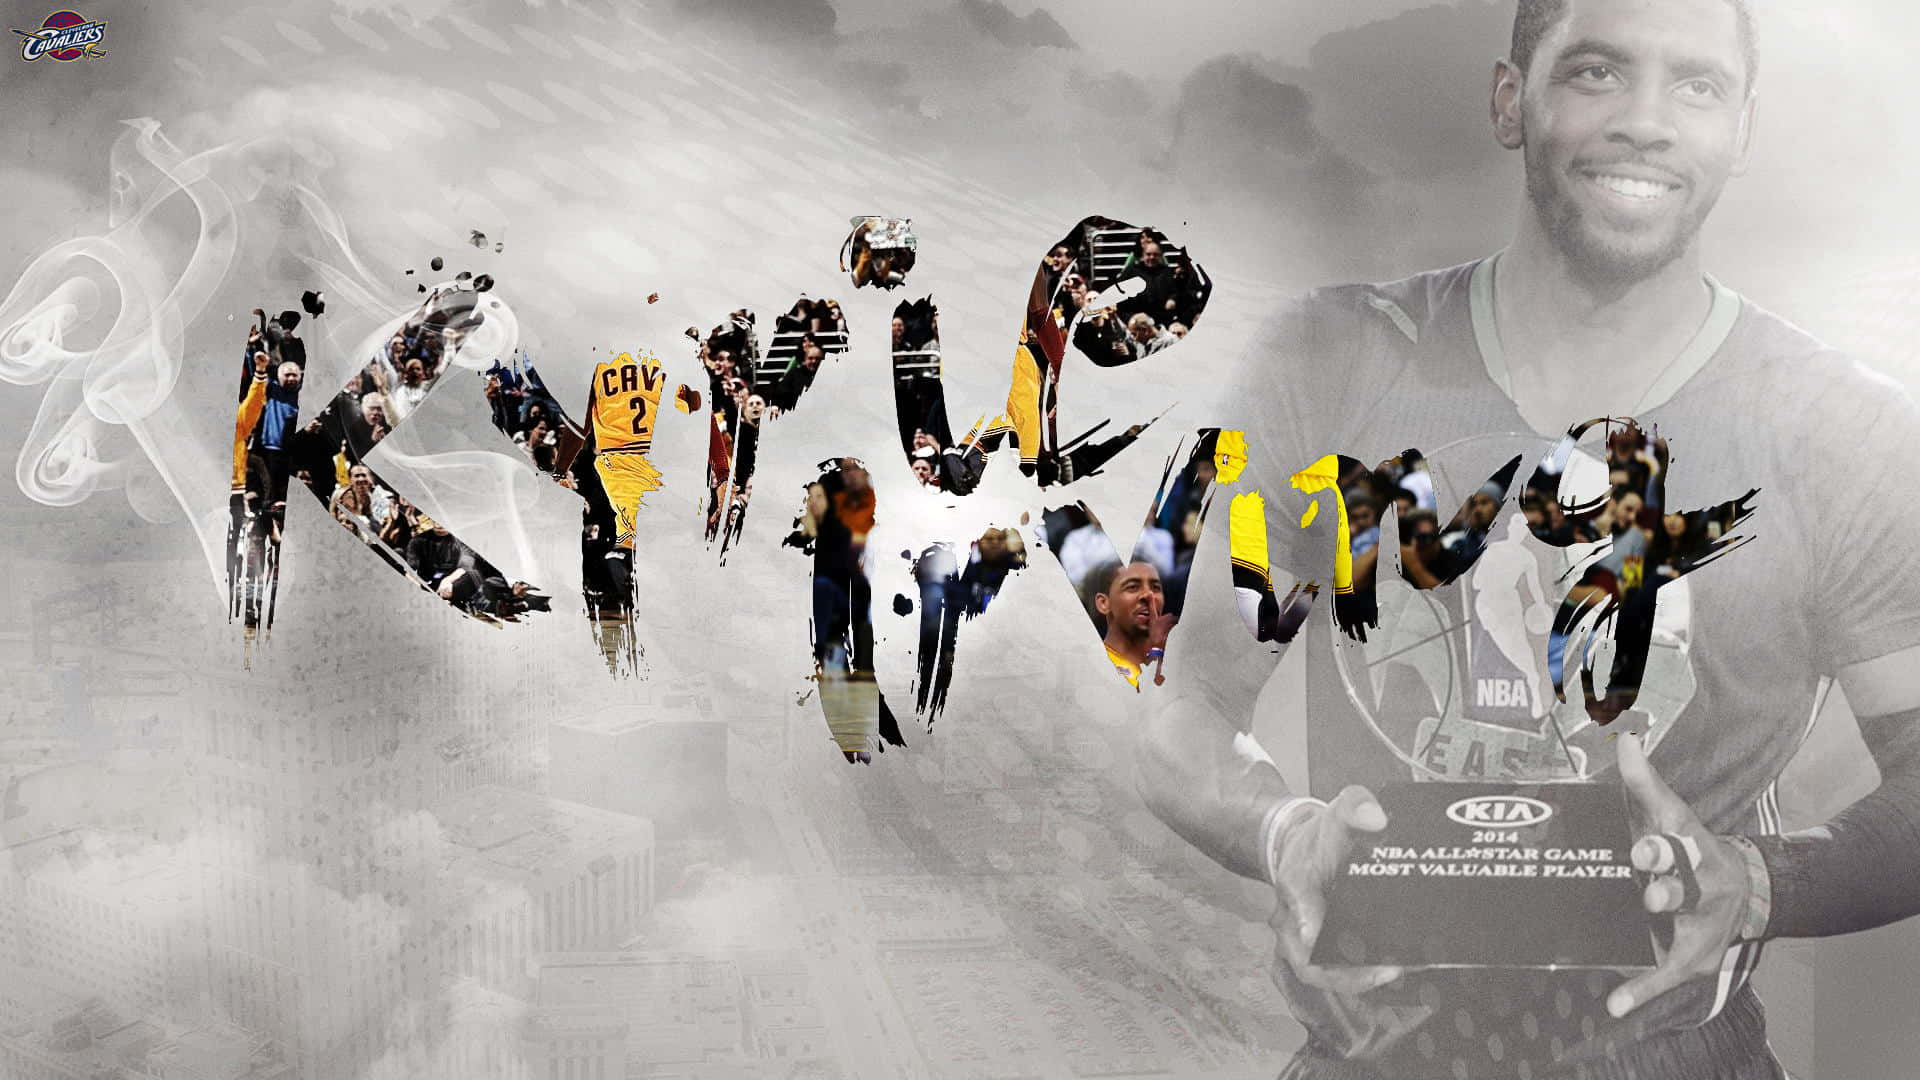 Kyrie Irving Styling in Action Wallpaper